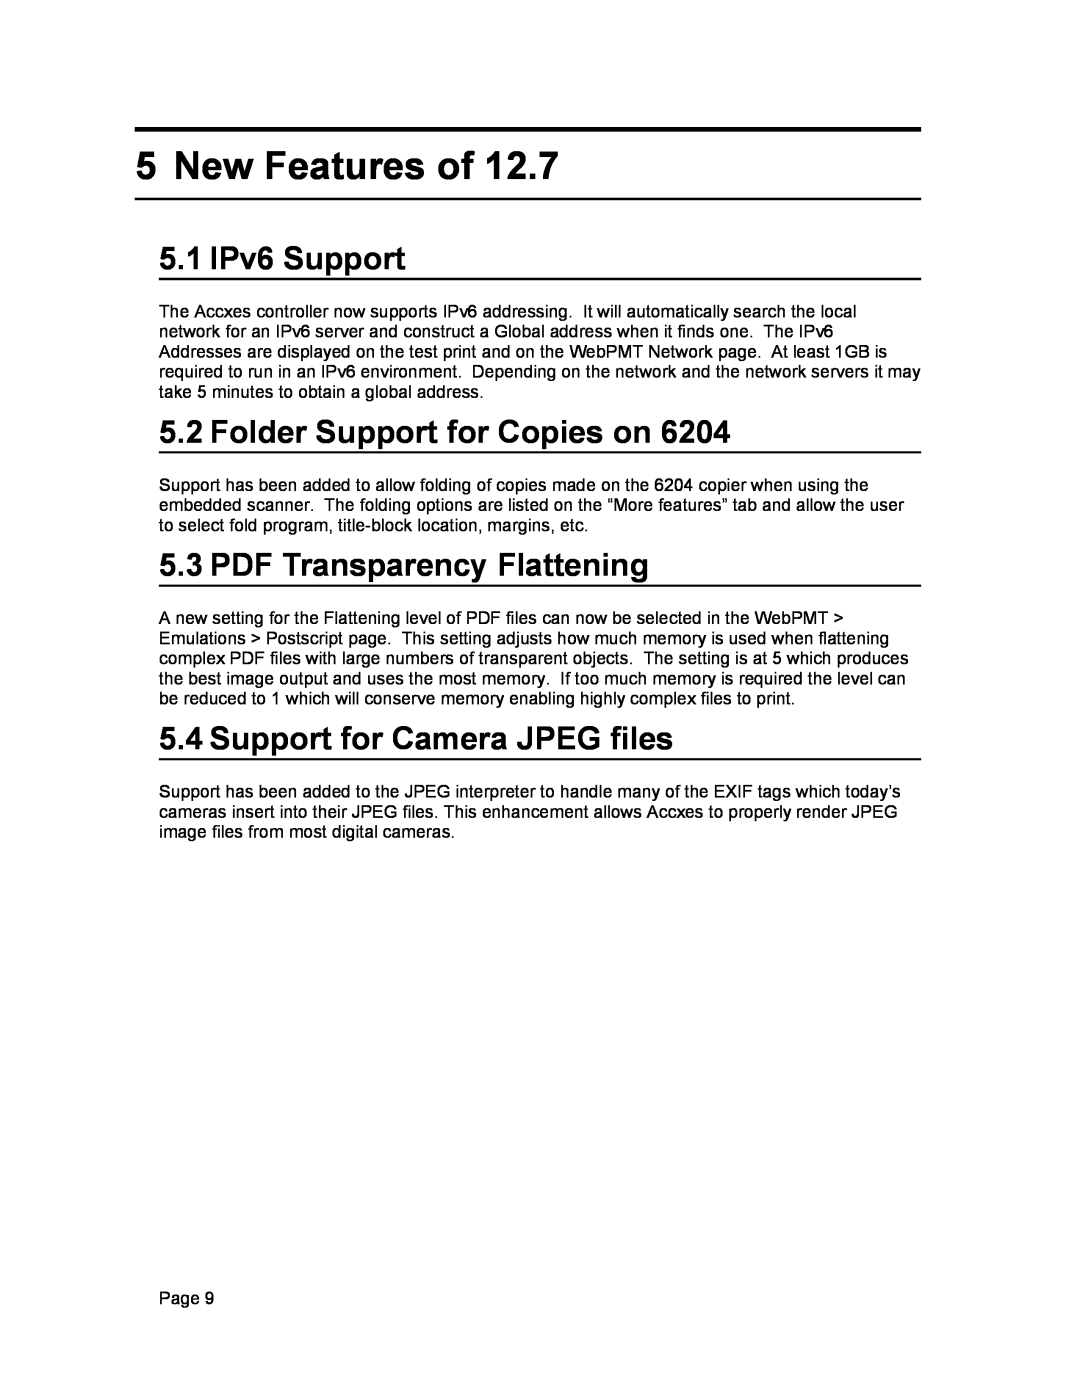 Xerox 12.7 B 114 manual New Features of, 5.1 IPv6 Support, Folder Support for Copies on, Support for Camera JPEG files 